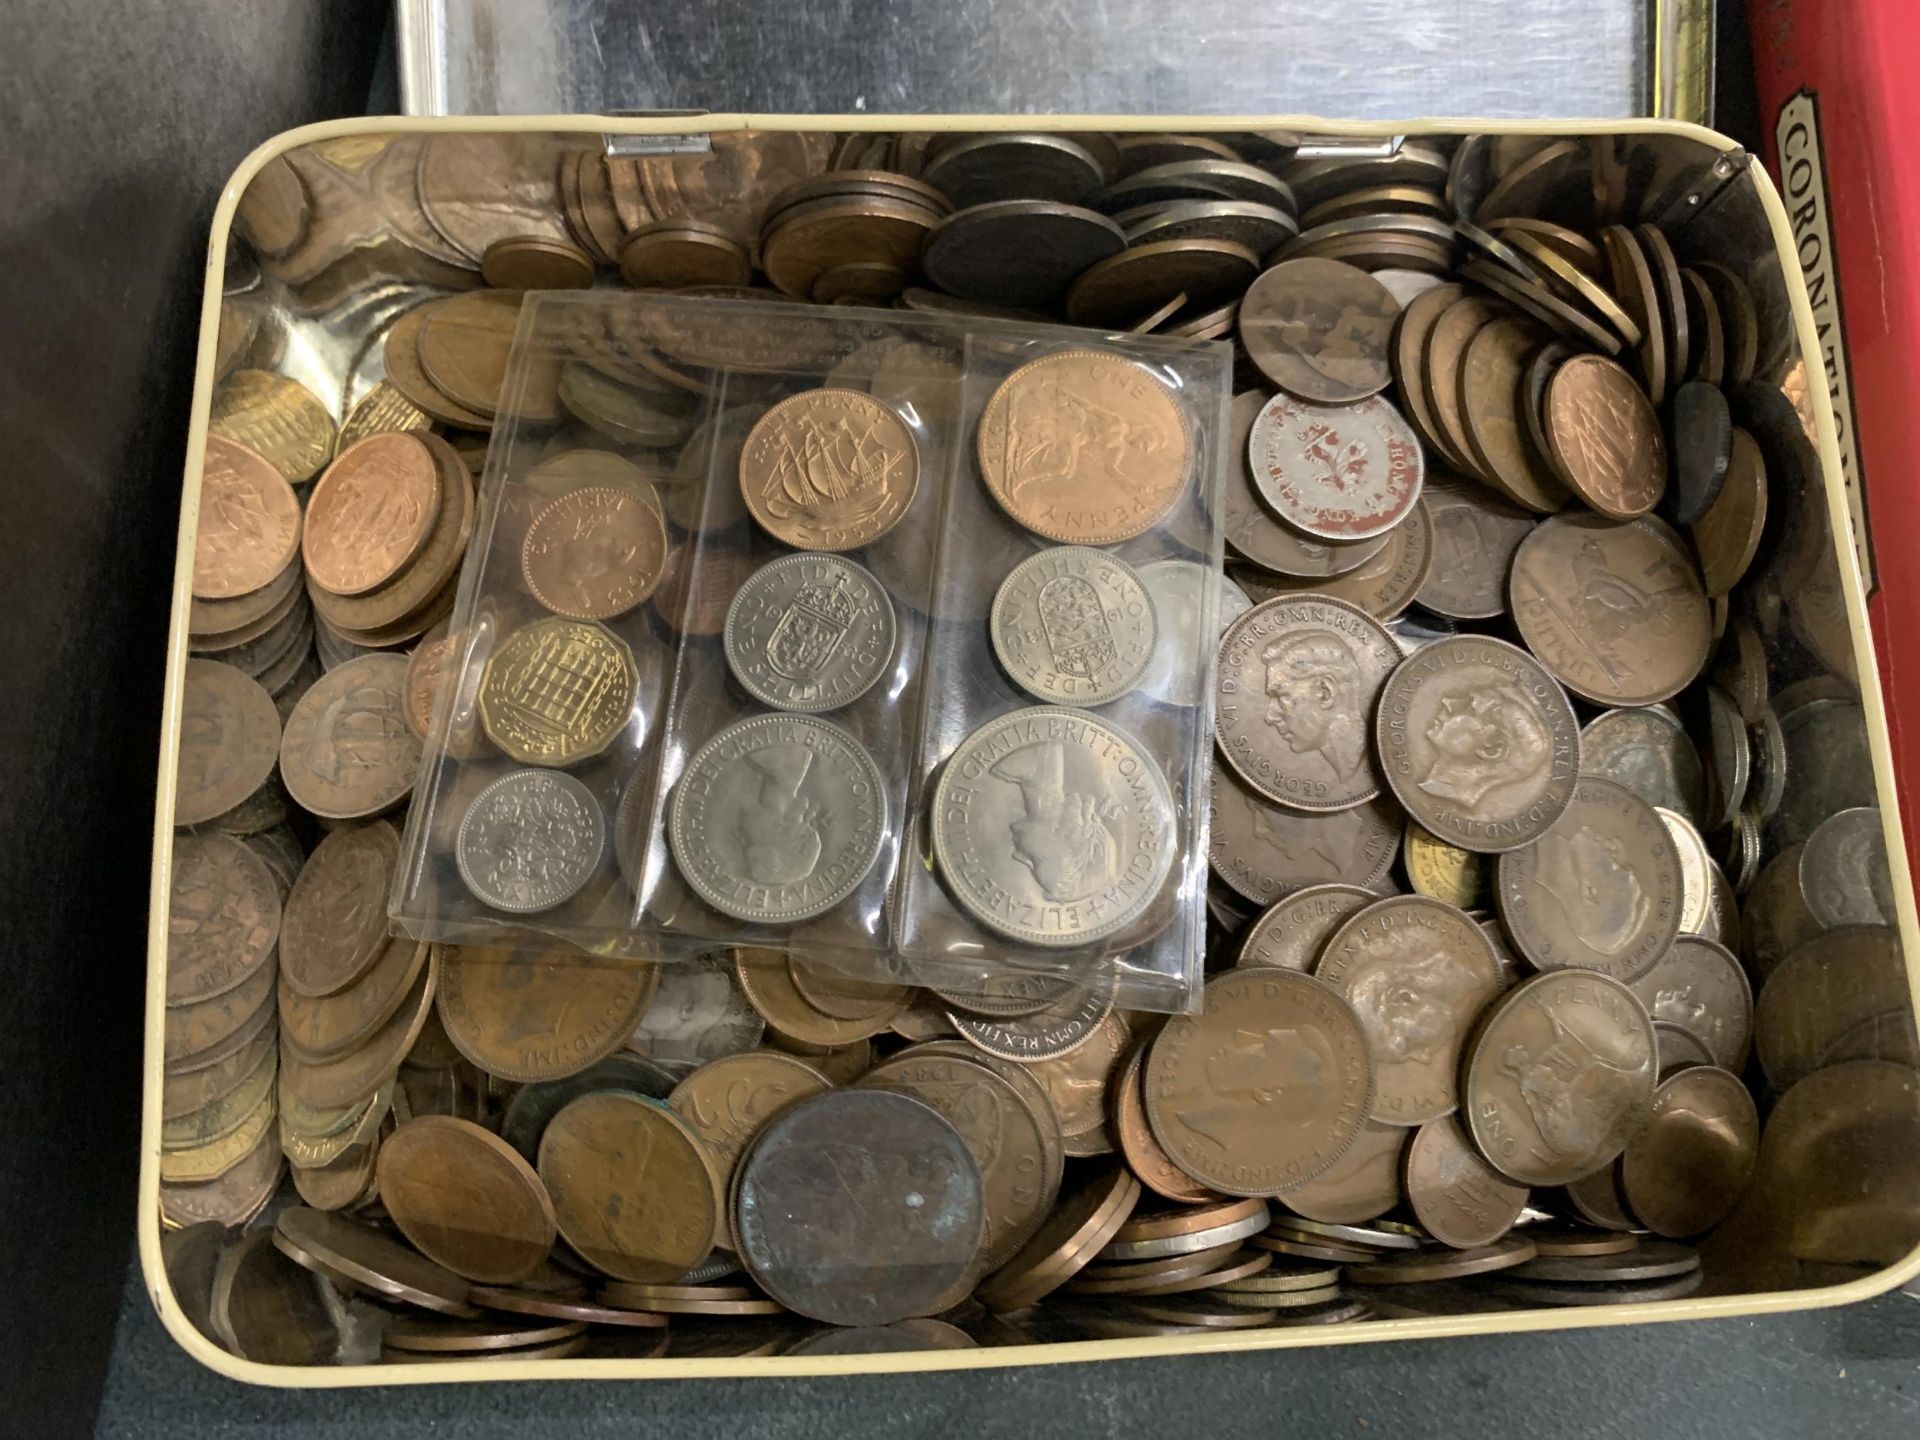 A LARGE QUANTITY OF PRE-DECIMAL COINS TO INCLUDE PENNIES, THREEPENNY BITS, HALF PENNIES, ETC PLUS